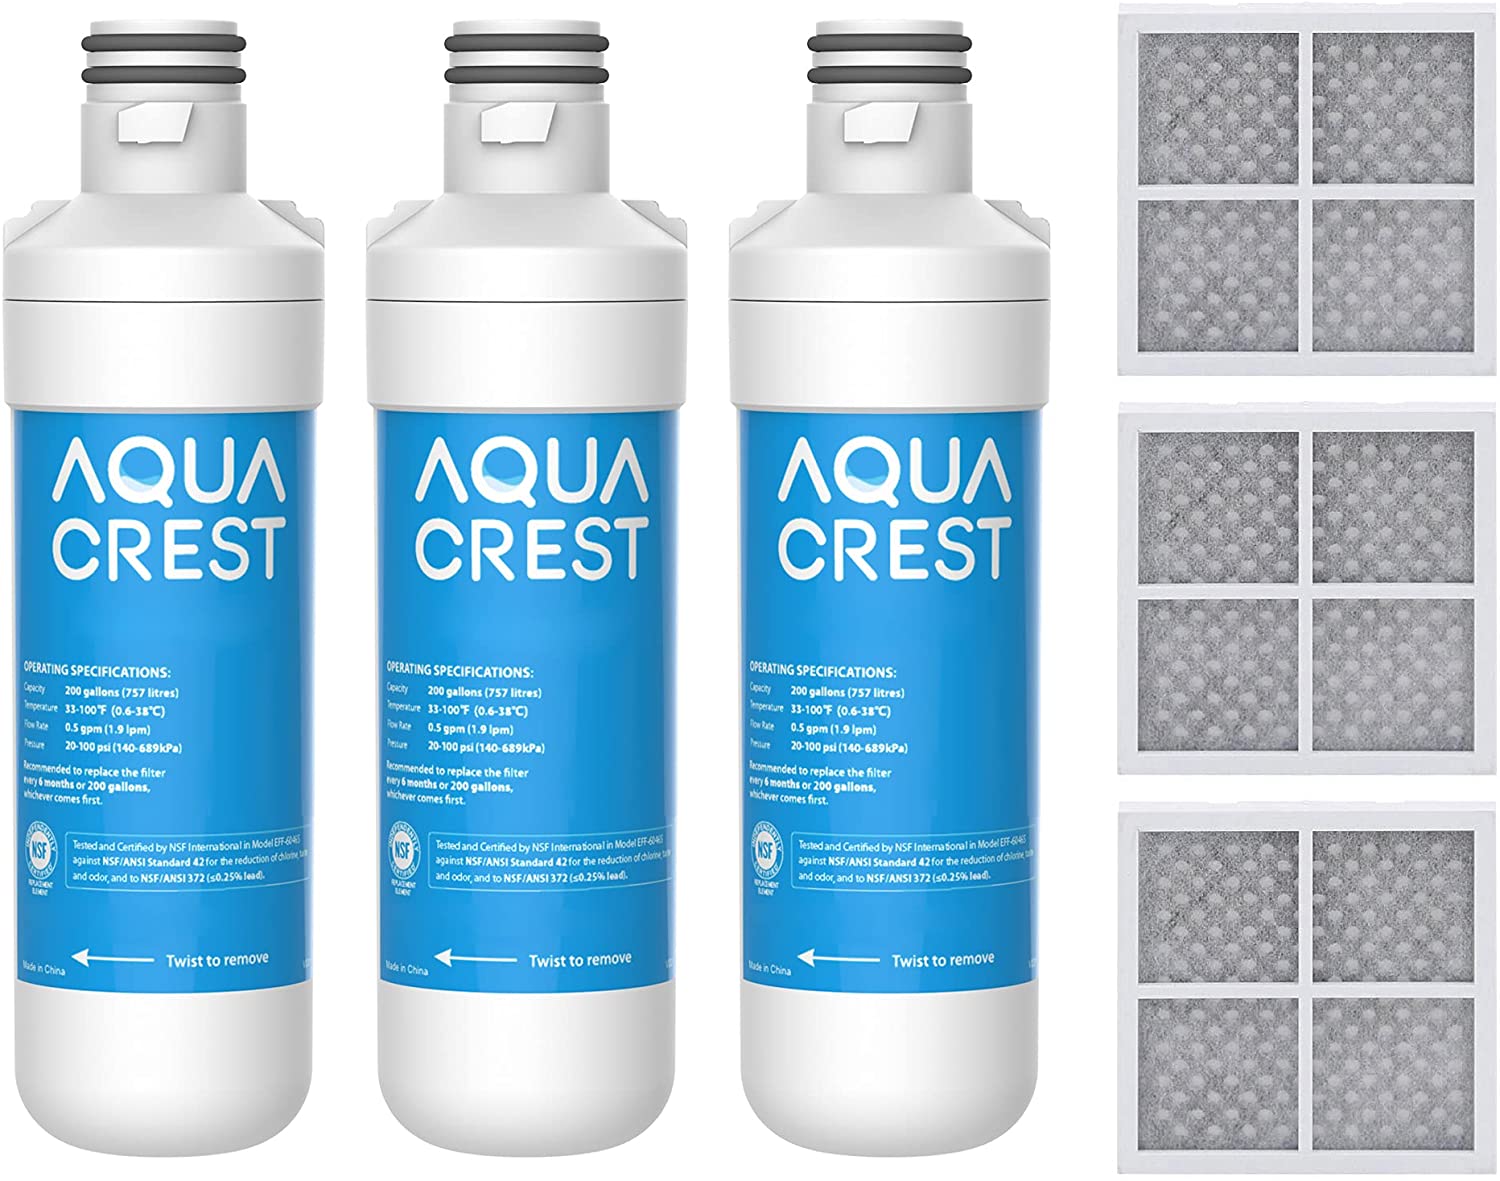 AQUACREST Refrigerator Water Filter, Replacement for LG® LT1000P®, LT1000PC, LT-1000PC and LT120F®